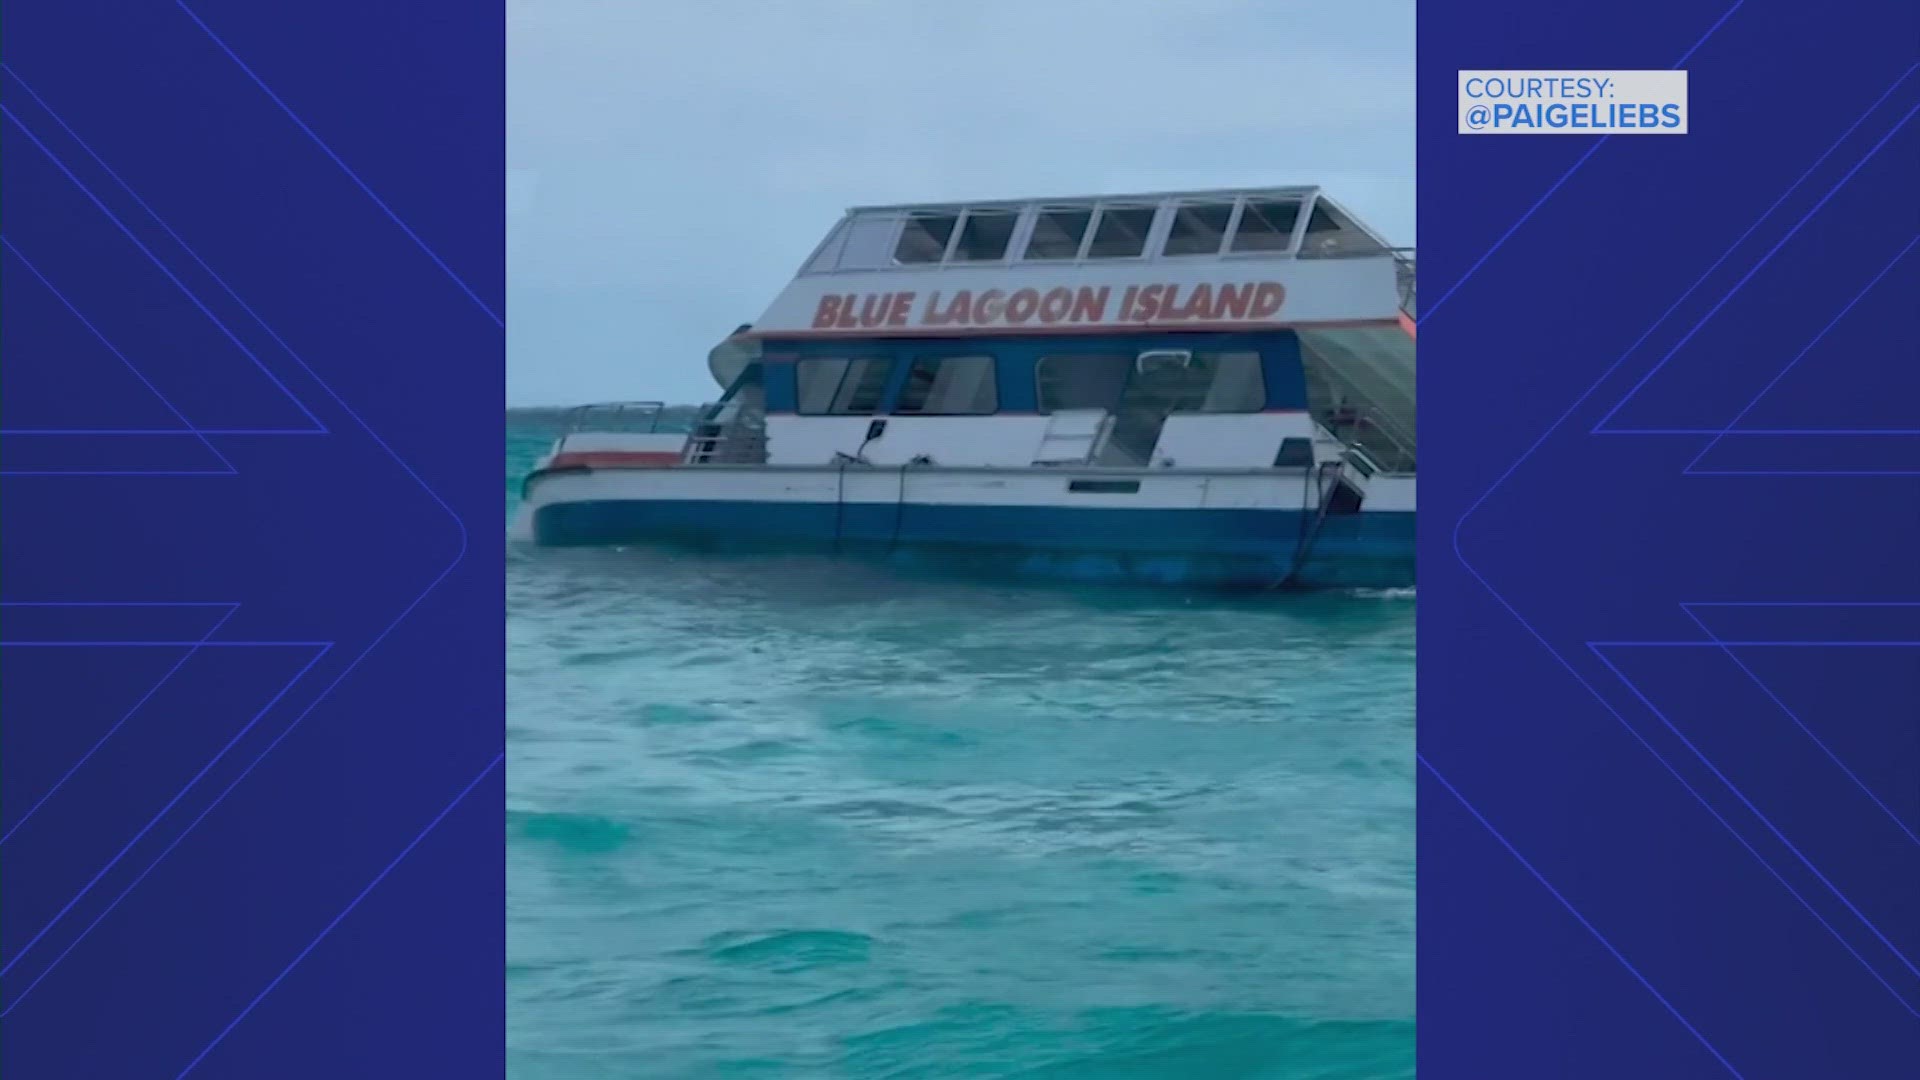 A 74-year-old Broomfield, Colorado woman died after the boat carrying more than 100 people sank while traveling to a private island.